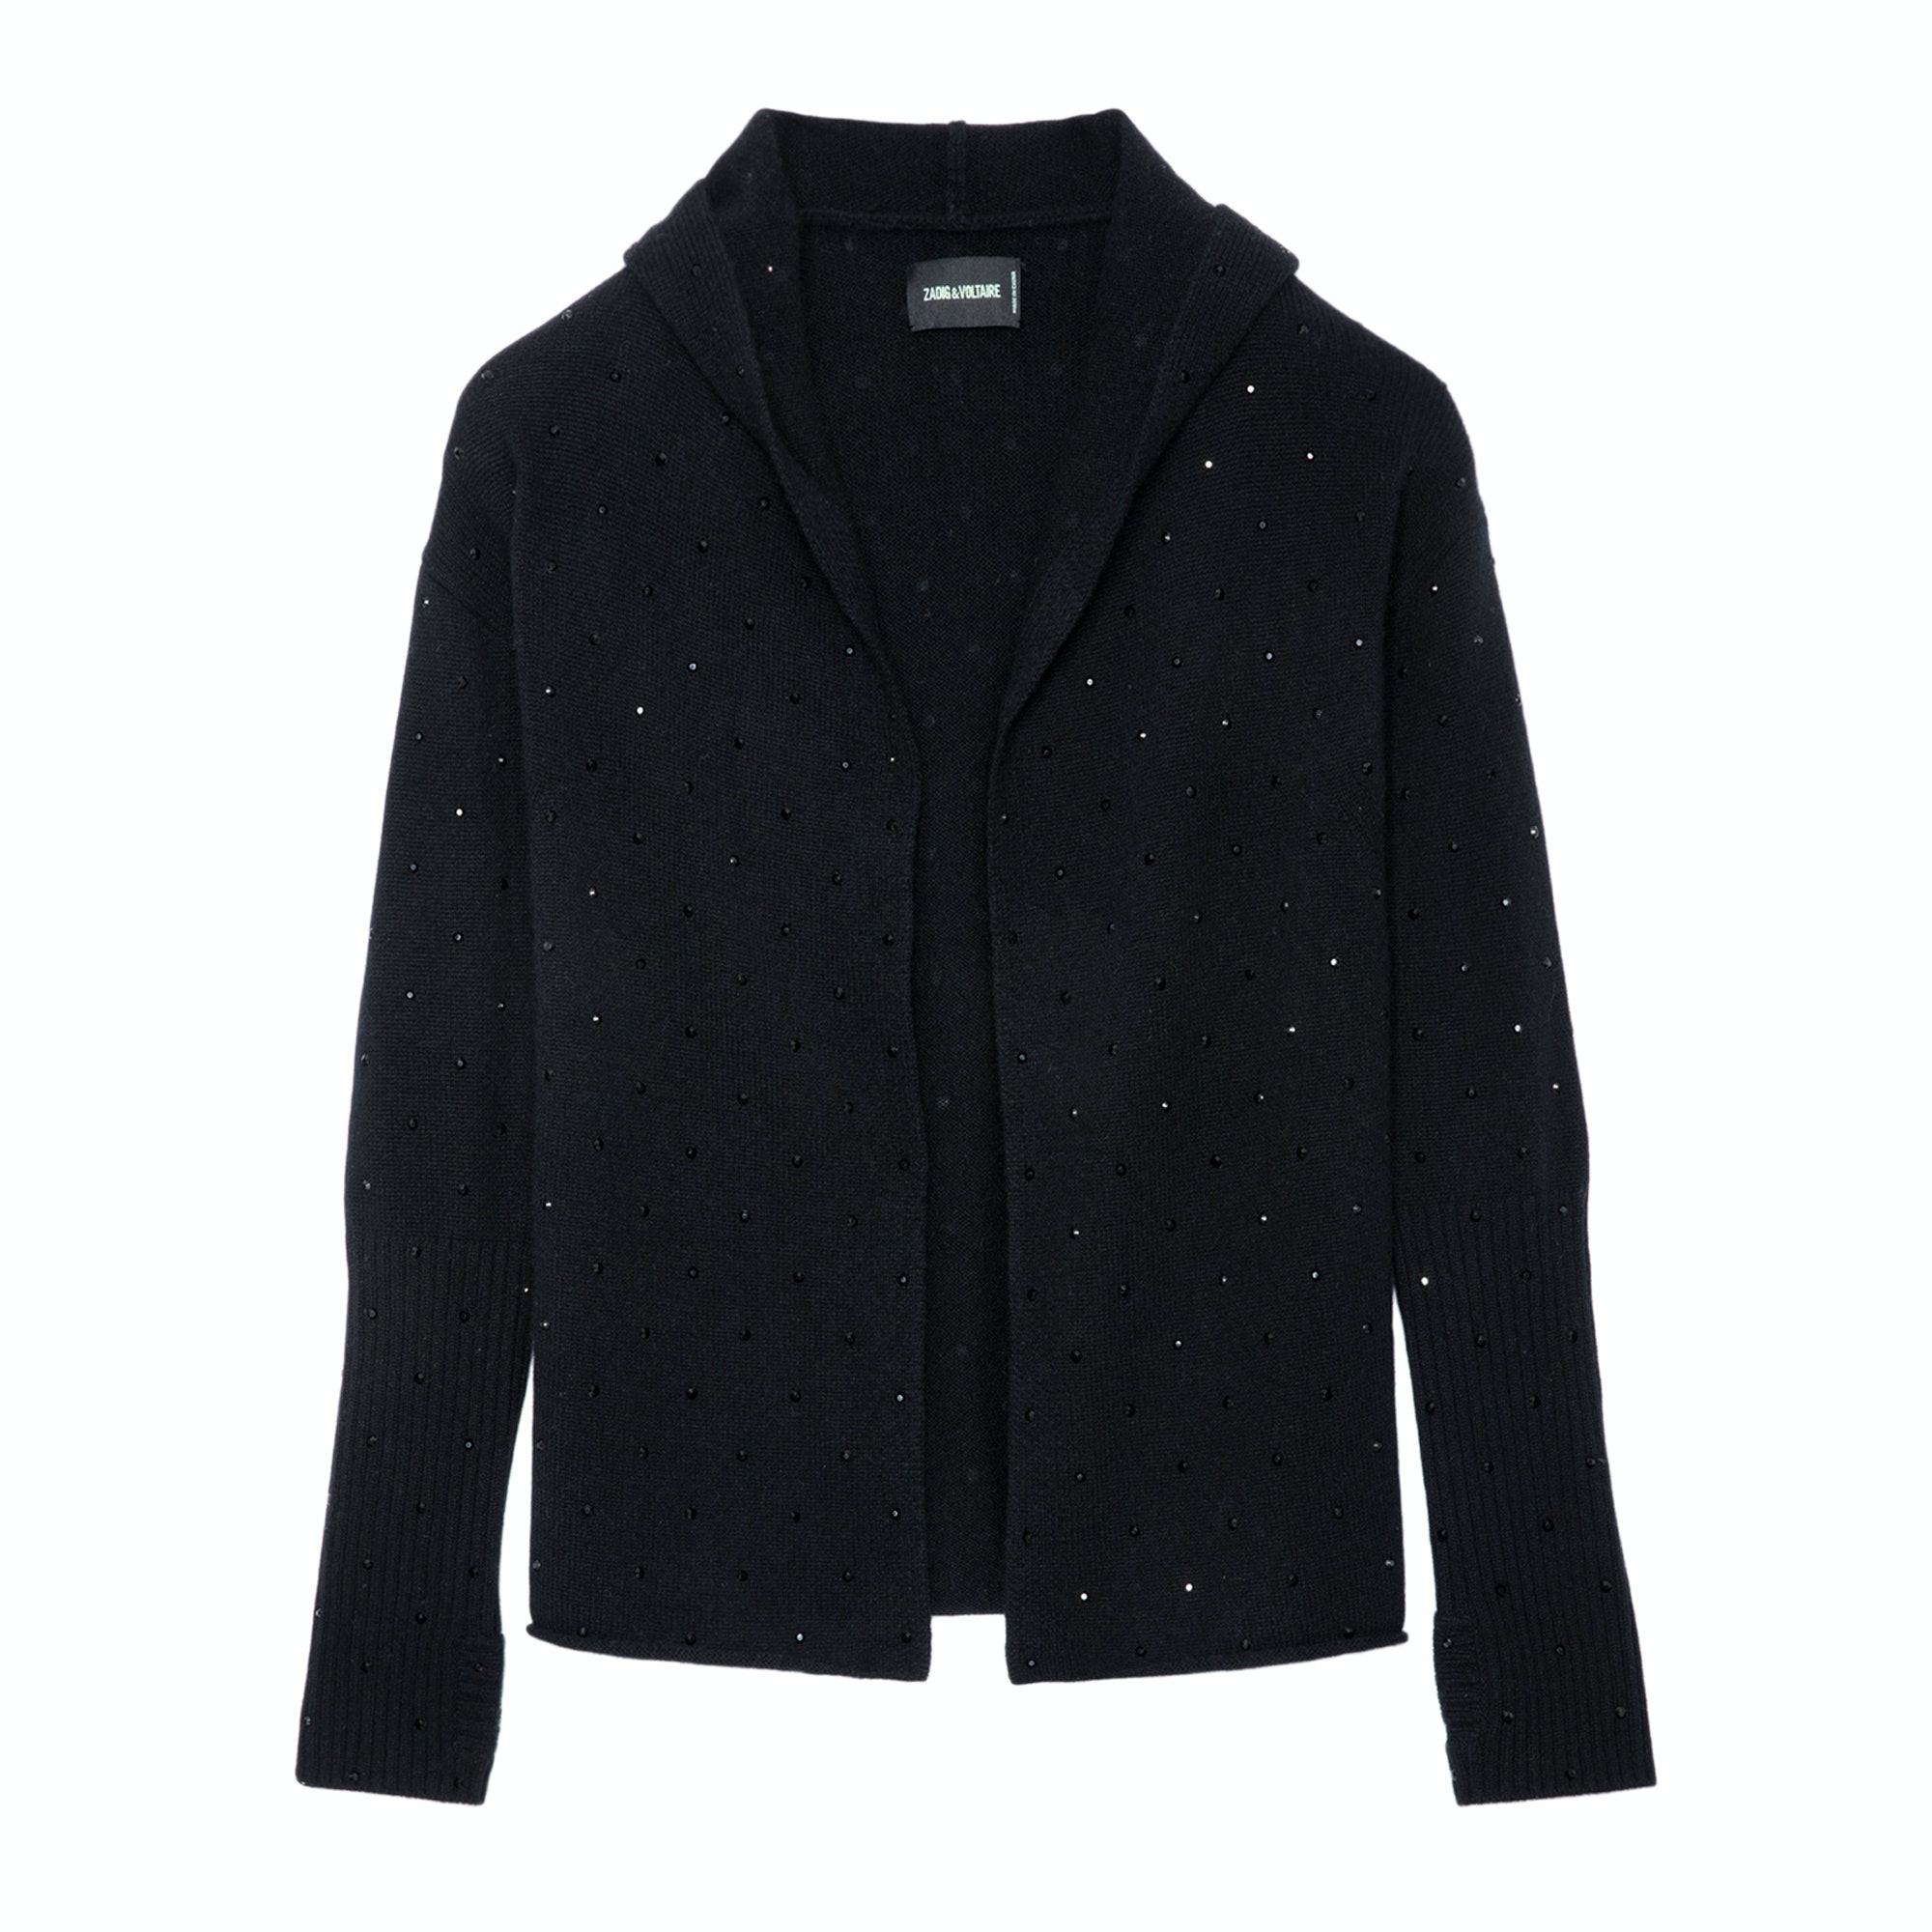 Cardigan Cosany Strass Cachemire Noir - Taille M/l - Femme